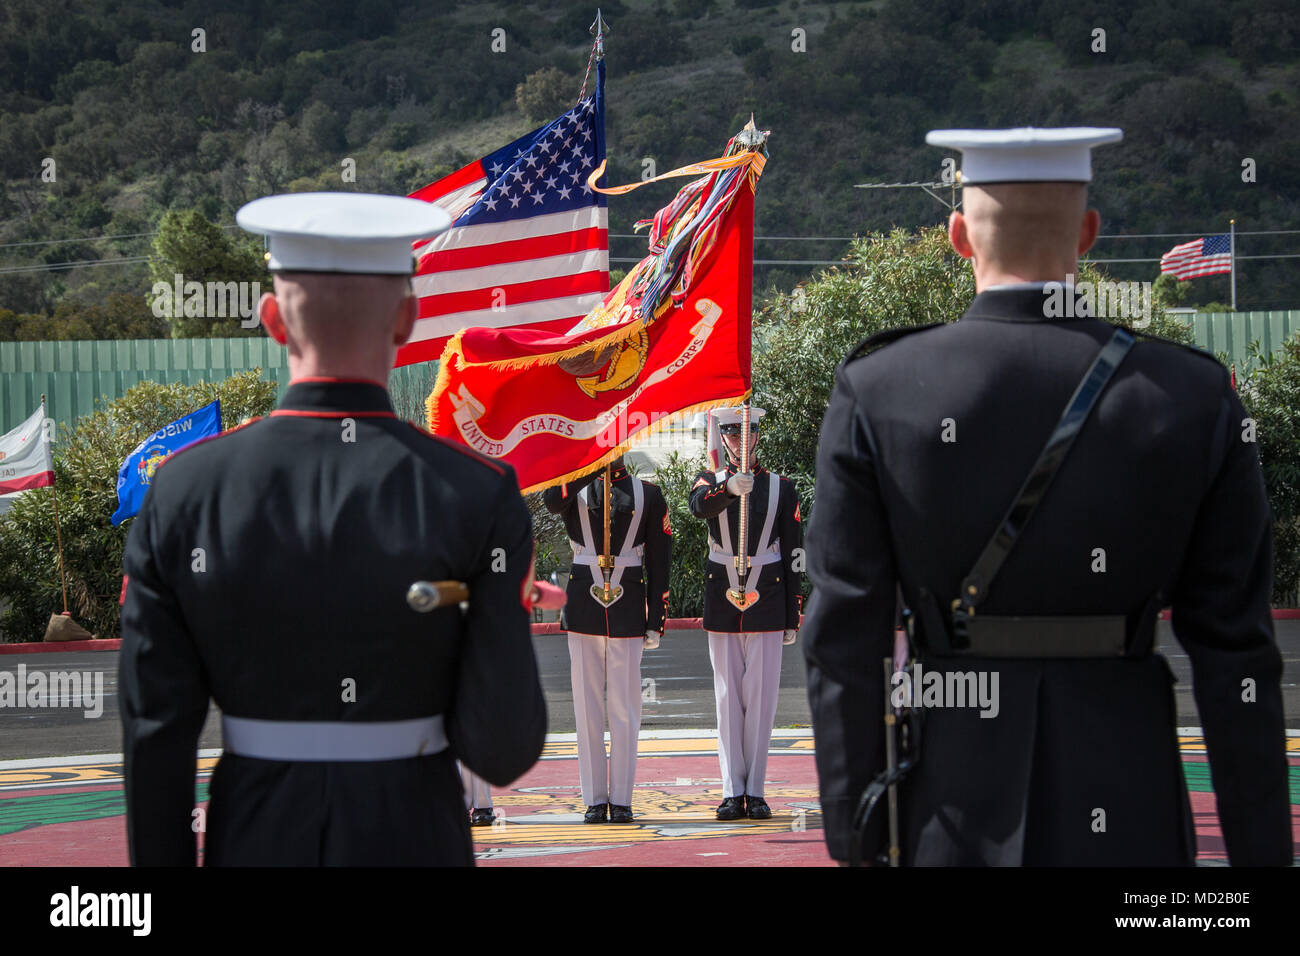 The U.S. Marine Corps Color Guard Platoon, with the Battle Color Detachment, presents the American and Marine Corps Battle Color flags during the Battle Colors Ceremony at Marine Corps Base Camp Pendleton, Calif., March 15, 2018. The ceremony featured the color guard, the Silent Drill Platoon, and 'The Commandant's Own,' the United States Marine Drum and Bugle Corps. (U.S. Marine Corps photo by Lance Cpl. Rhita Daniel) Stock Photo